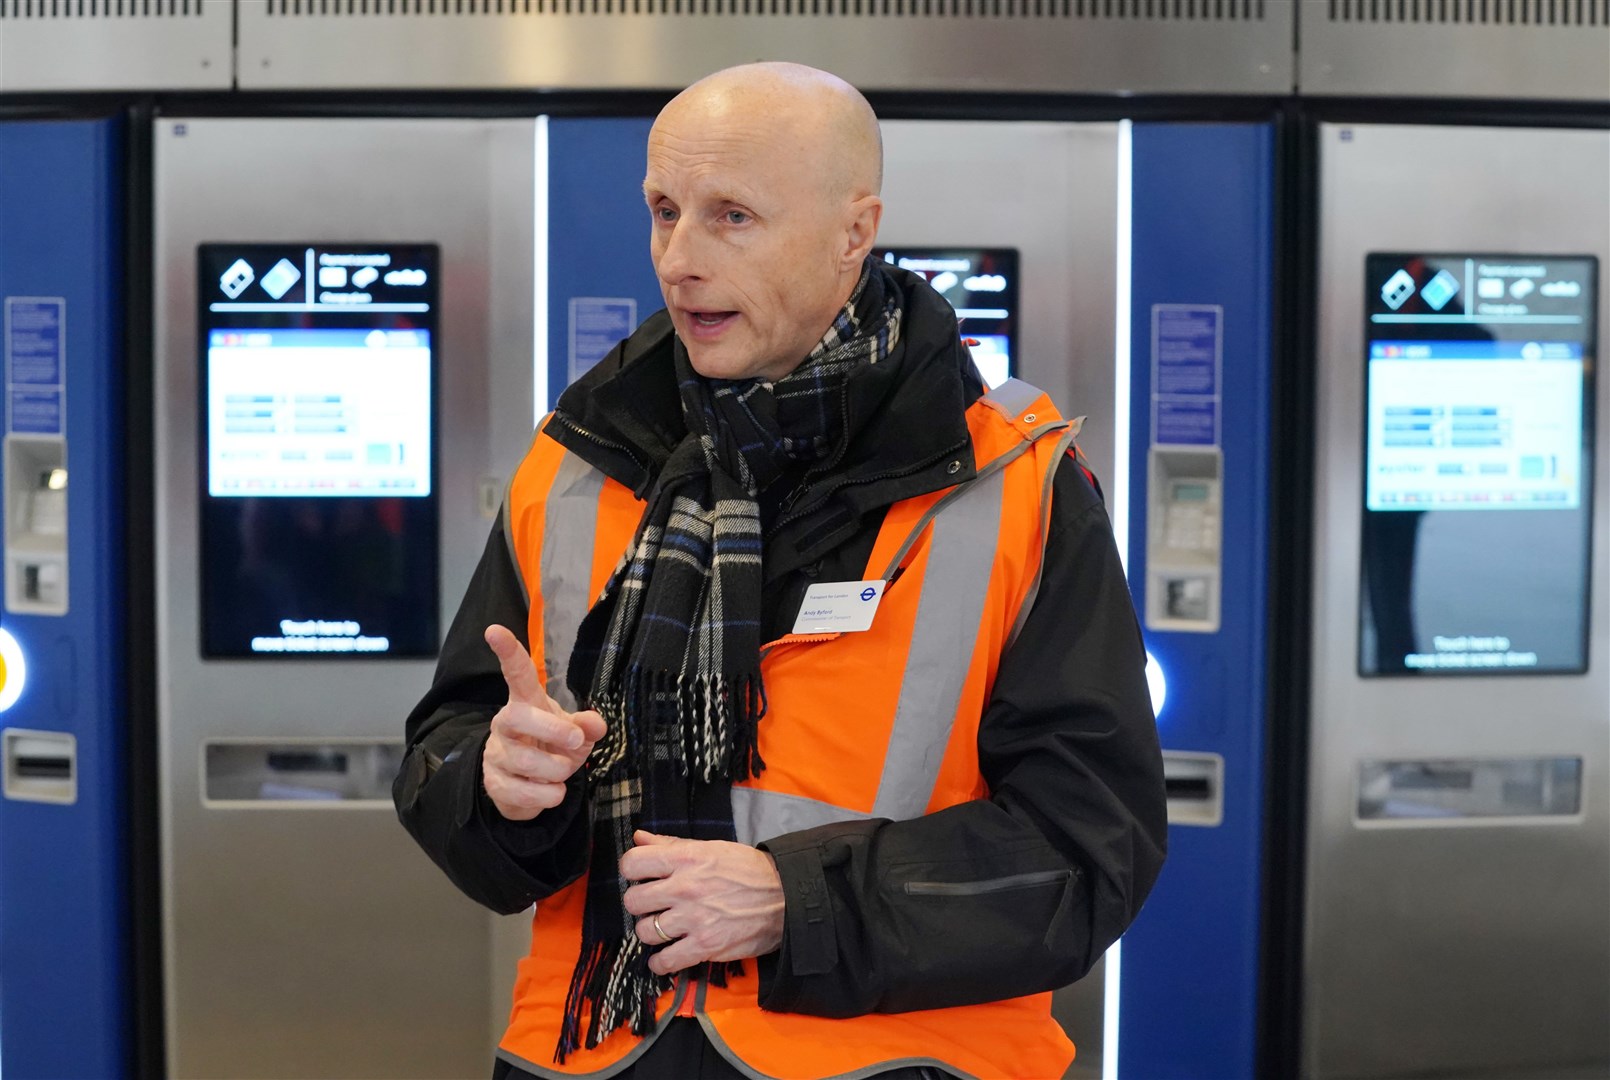 Transport commissioner Andy Byford said TfL staff have ‘dropped everything’ (Jonathan Brady/PA)